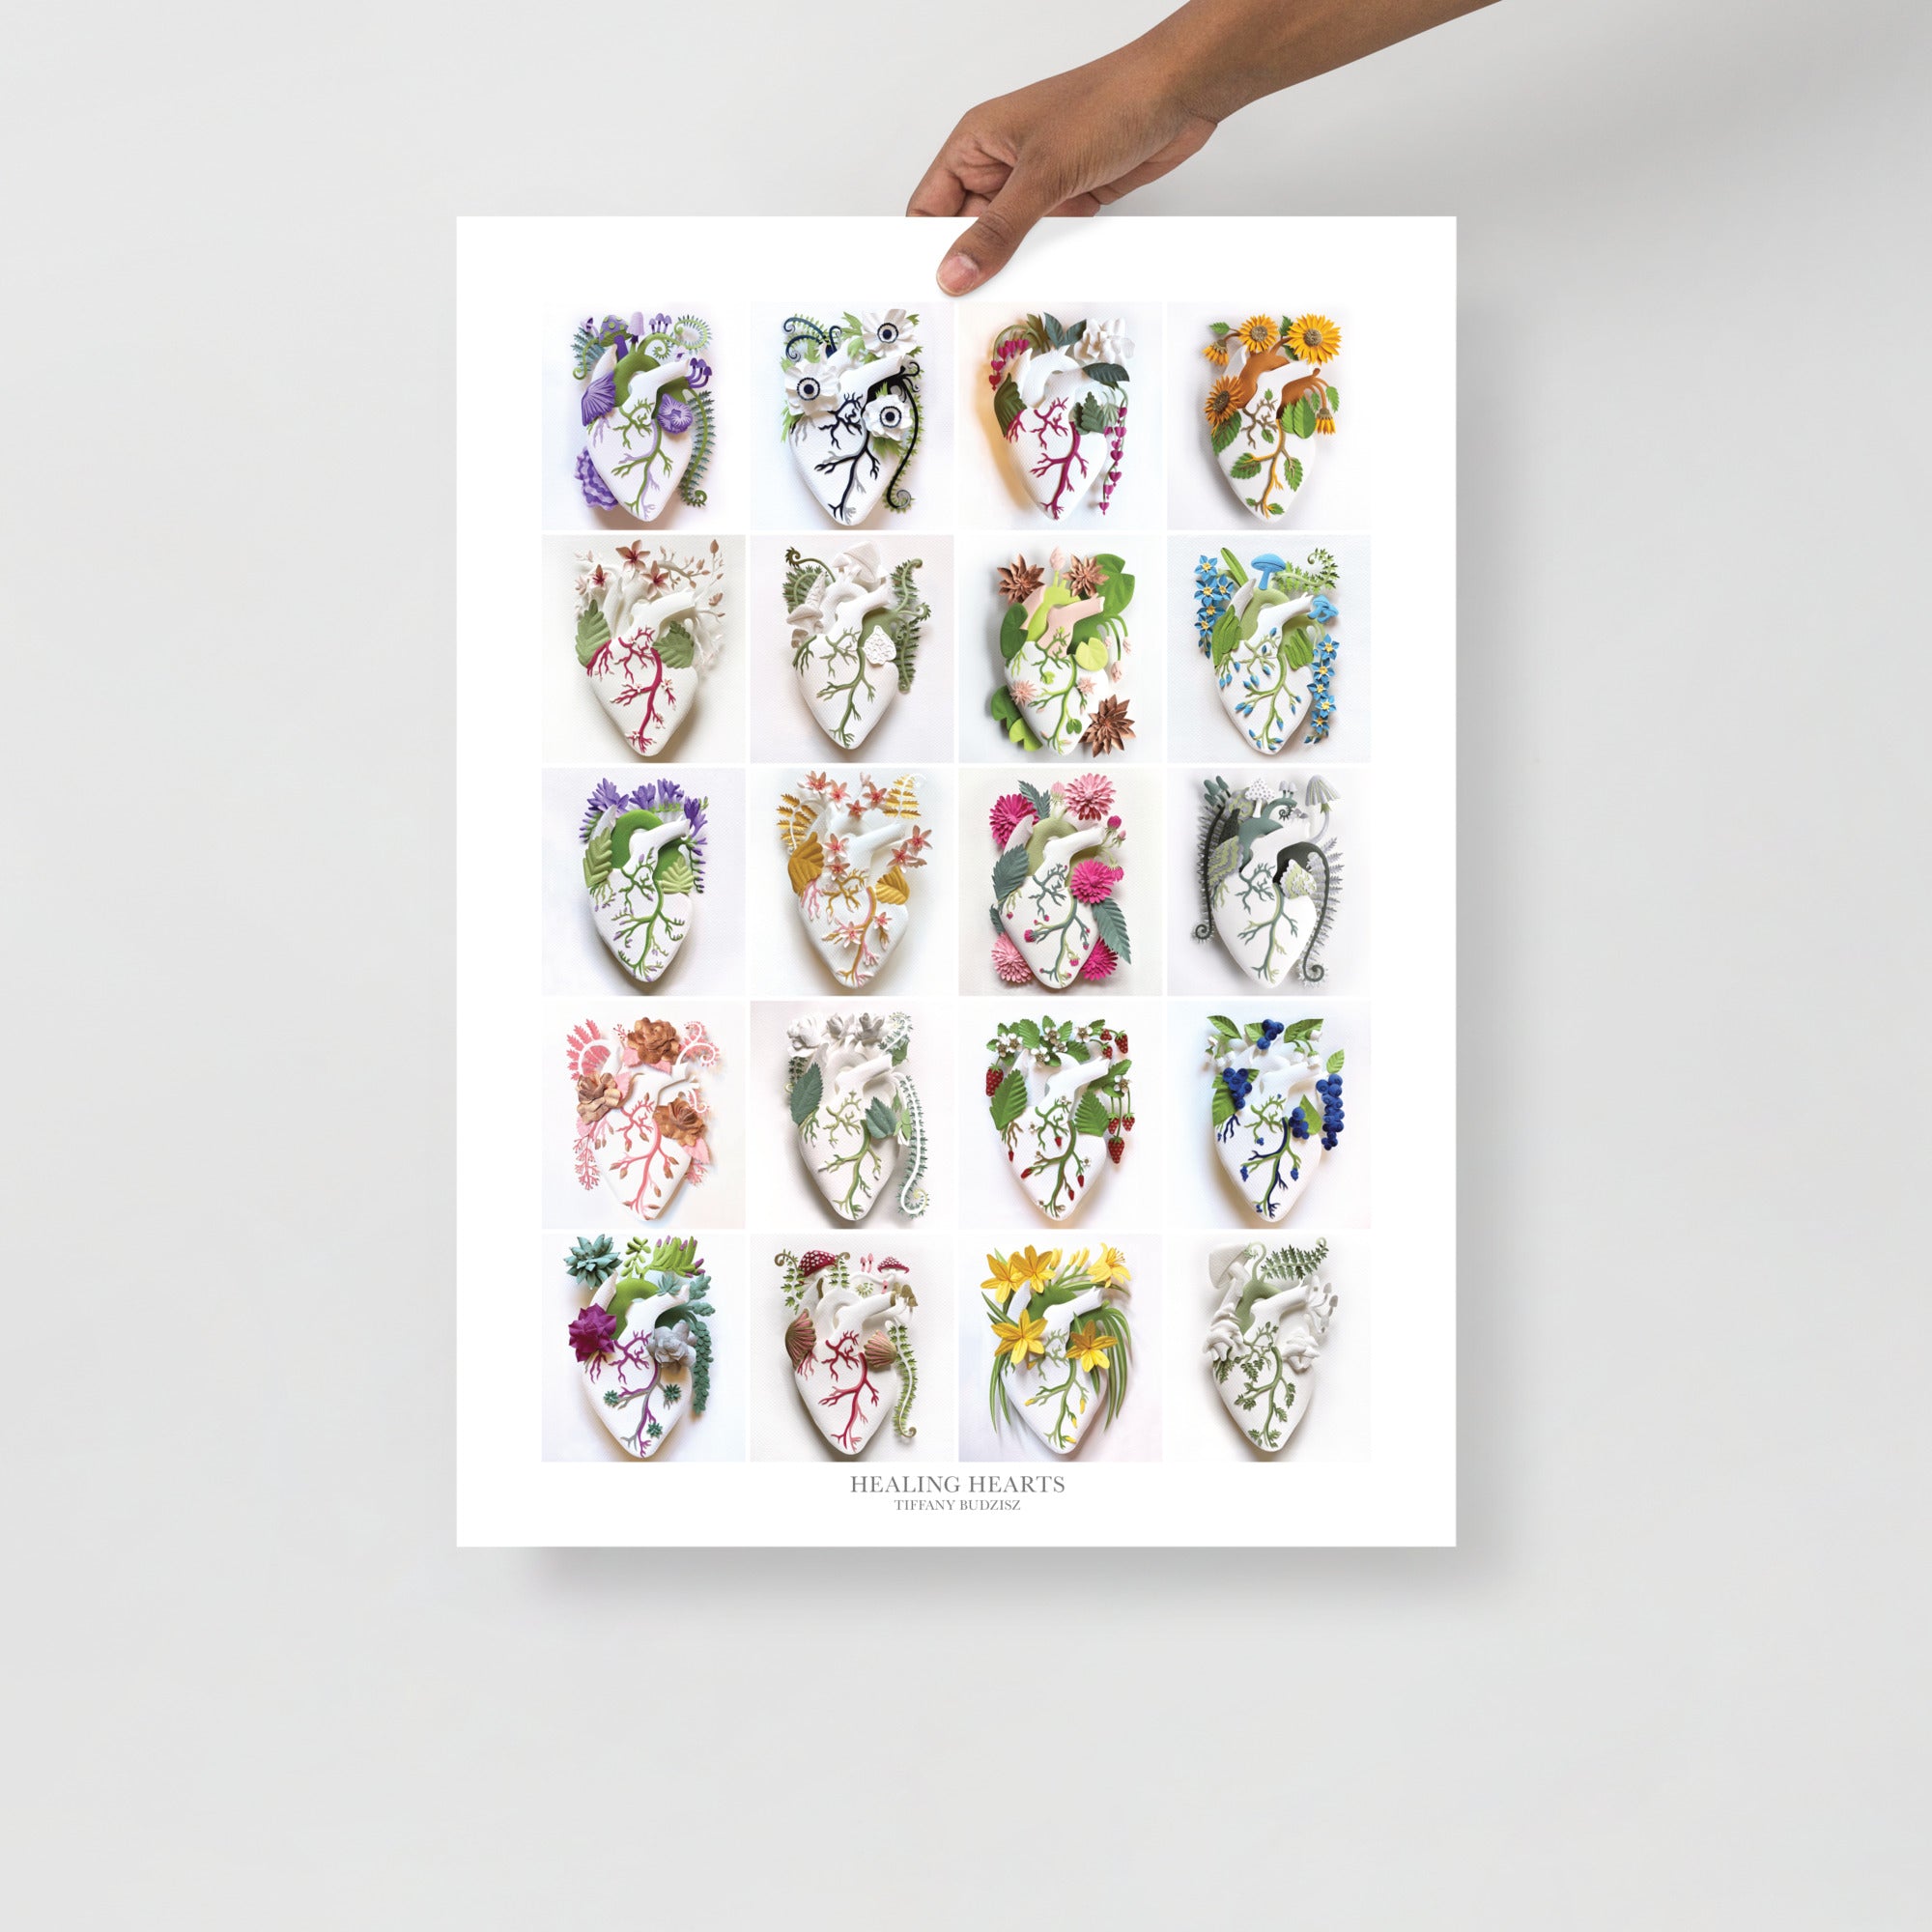 Healing Hearts Collection 18" x 24" Poster